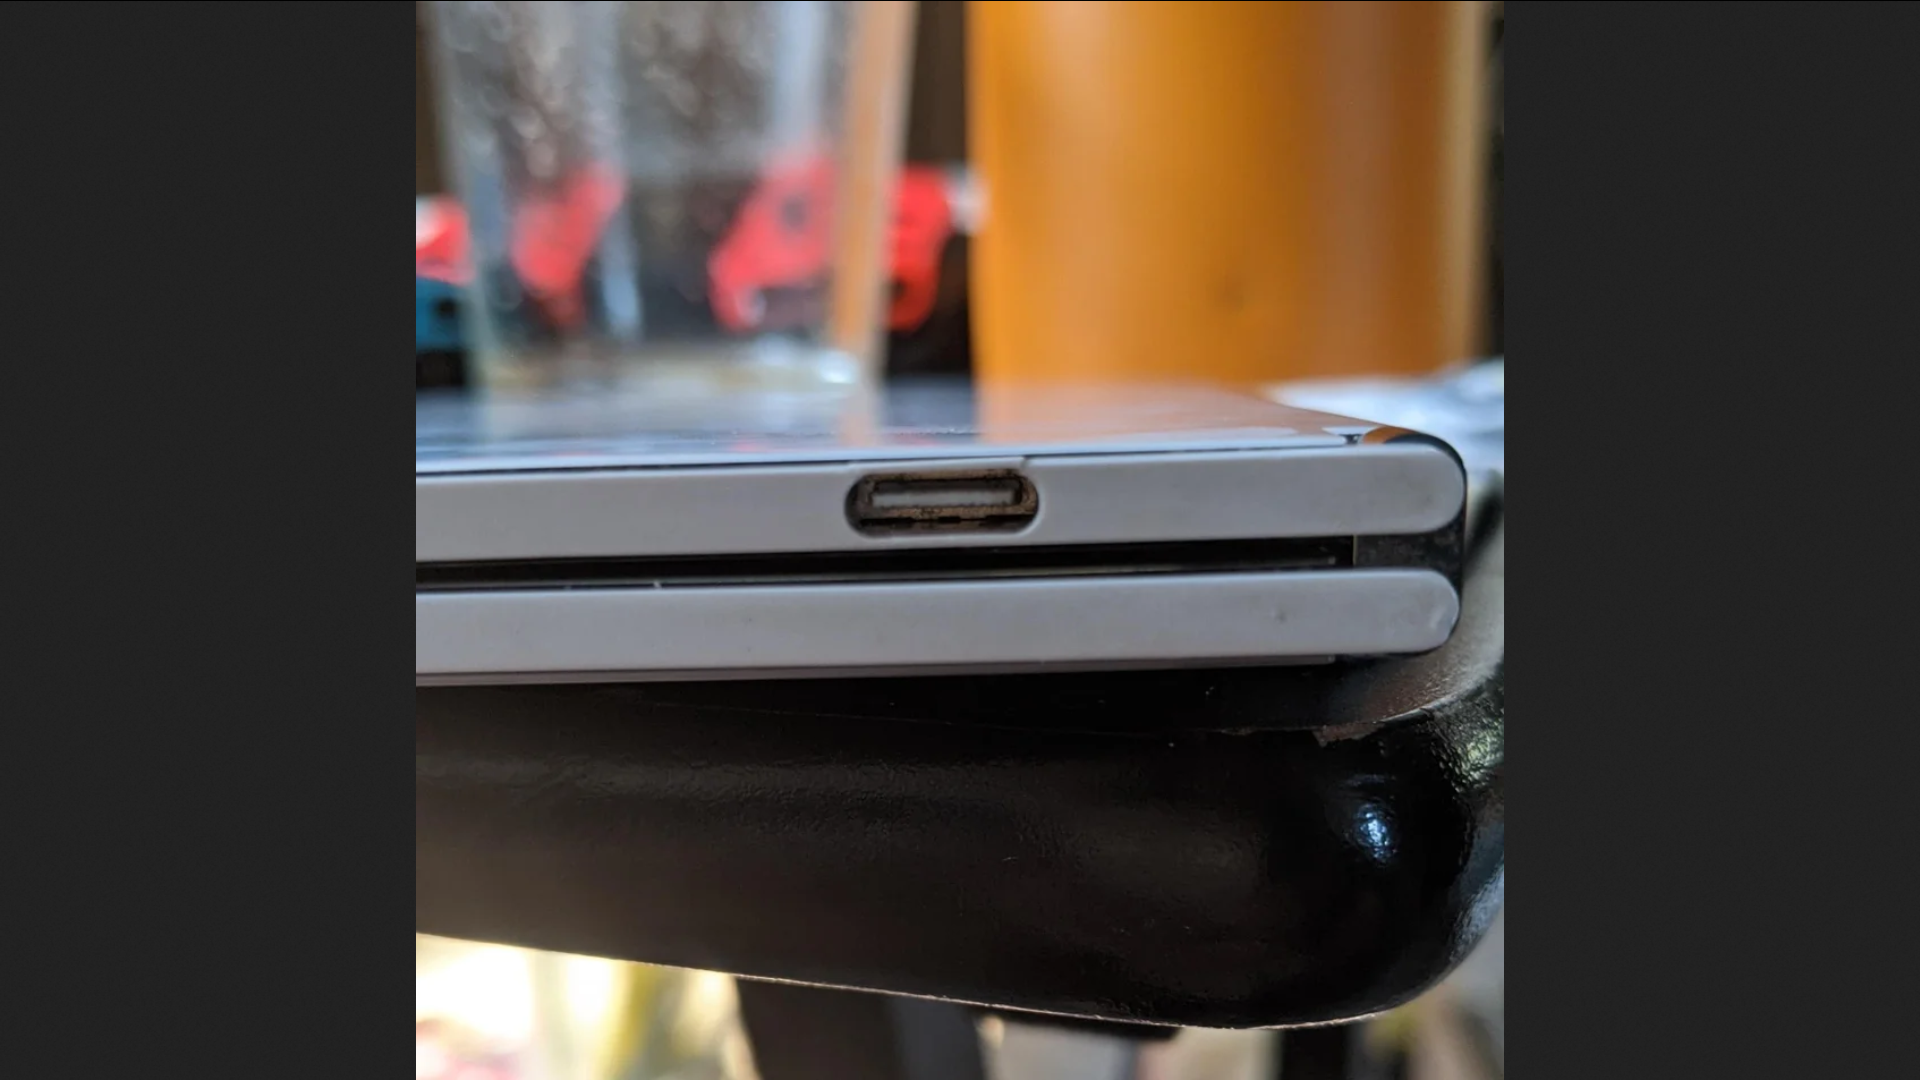 Some Microsoft Flooring Duo owners are reporting that its body cracks round the charging port